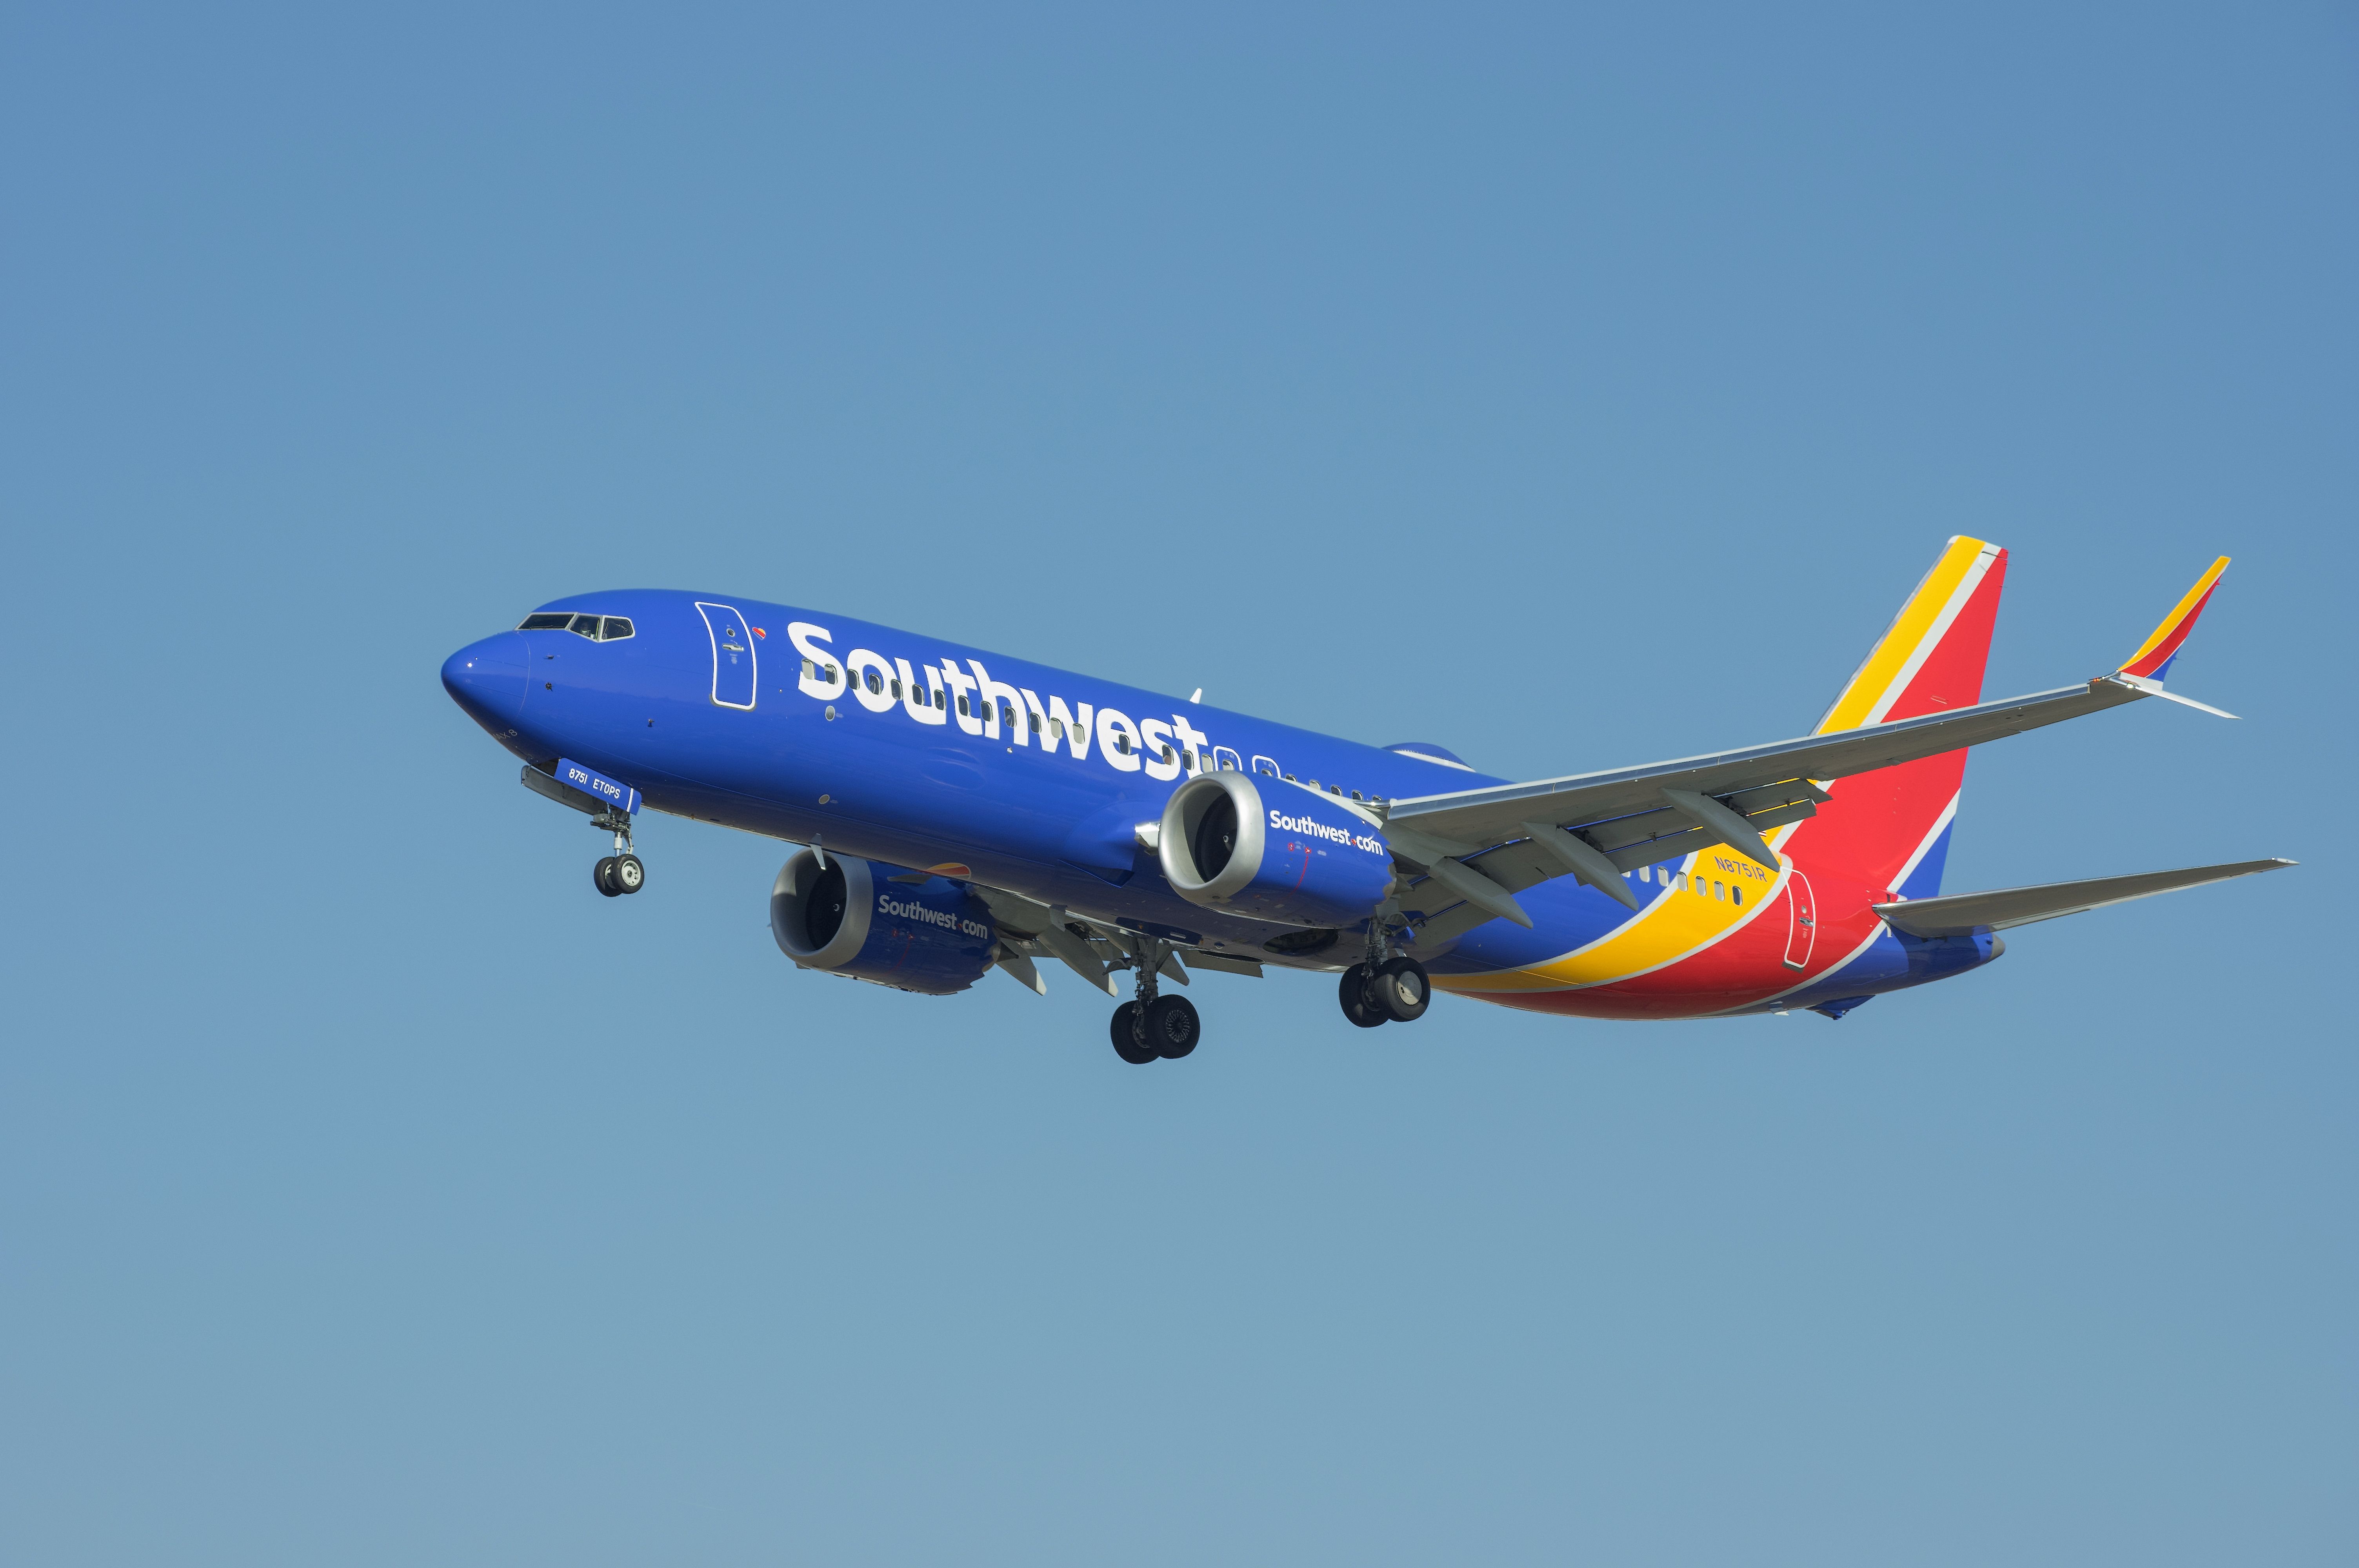 A Southwest Airlines Boeing 737 MAX 8 